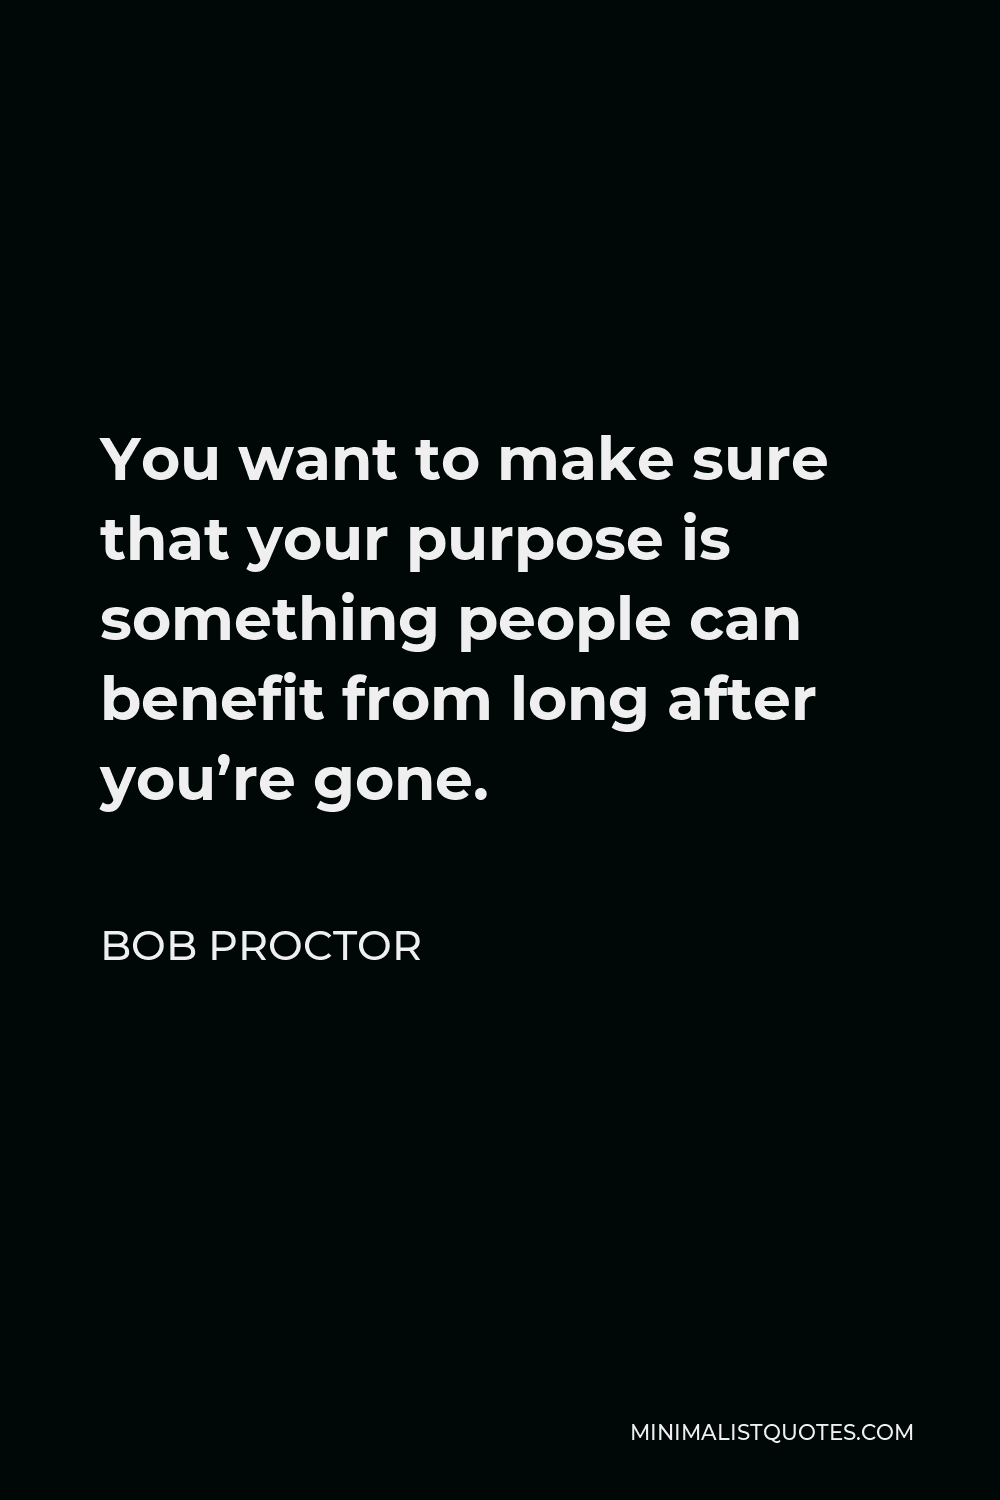 Bob Proctor Quote - You want to make sure that your purpose is something people can benefit from long after you’re gone.